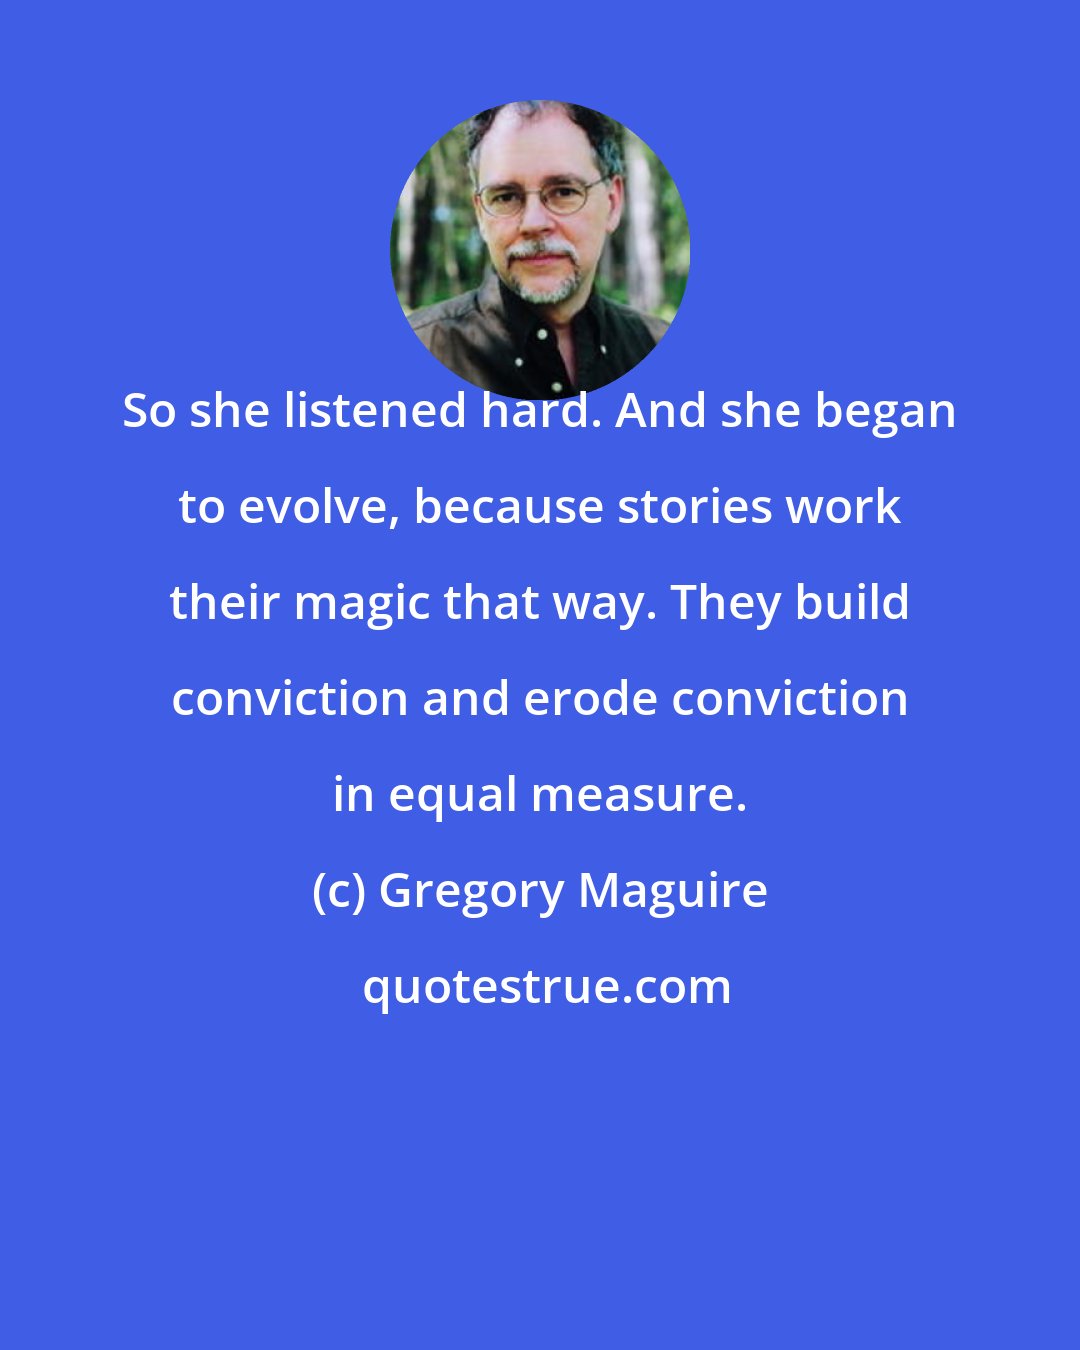 Gregory Maguire: So she listened hard. And she began to evolve, because stories work their magic that way. They build conviction and erode conviction in equal measure.